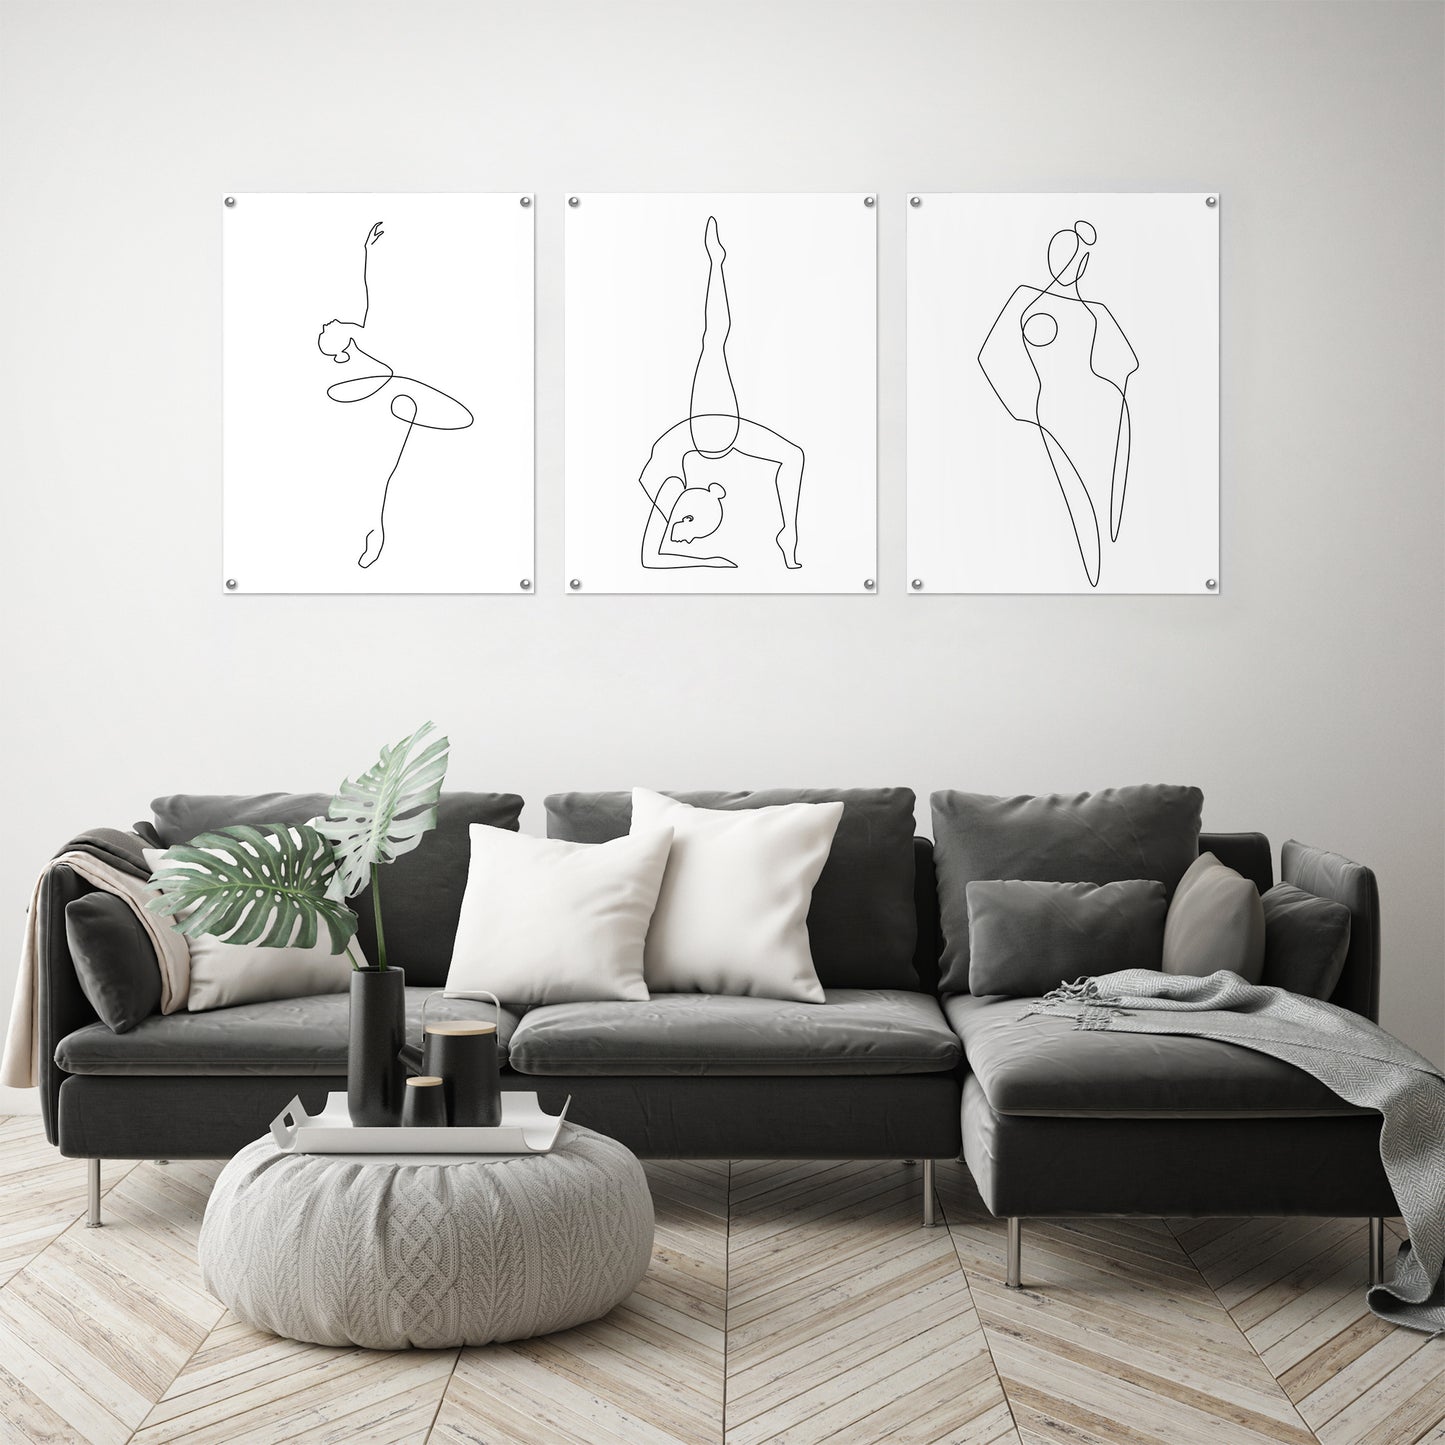 (Set of 3) Triptych Wall Art Abstract Movement by Explicit Design - Poster Print